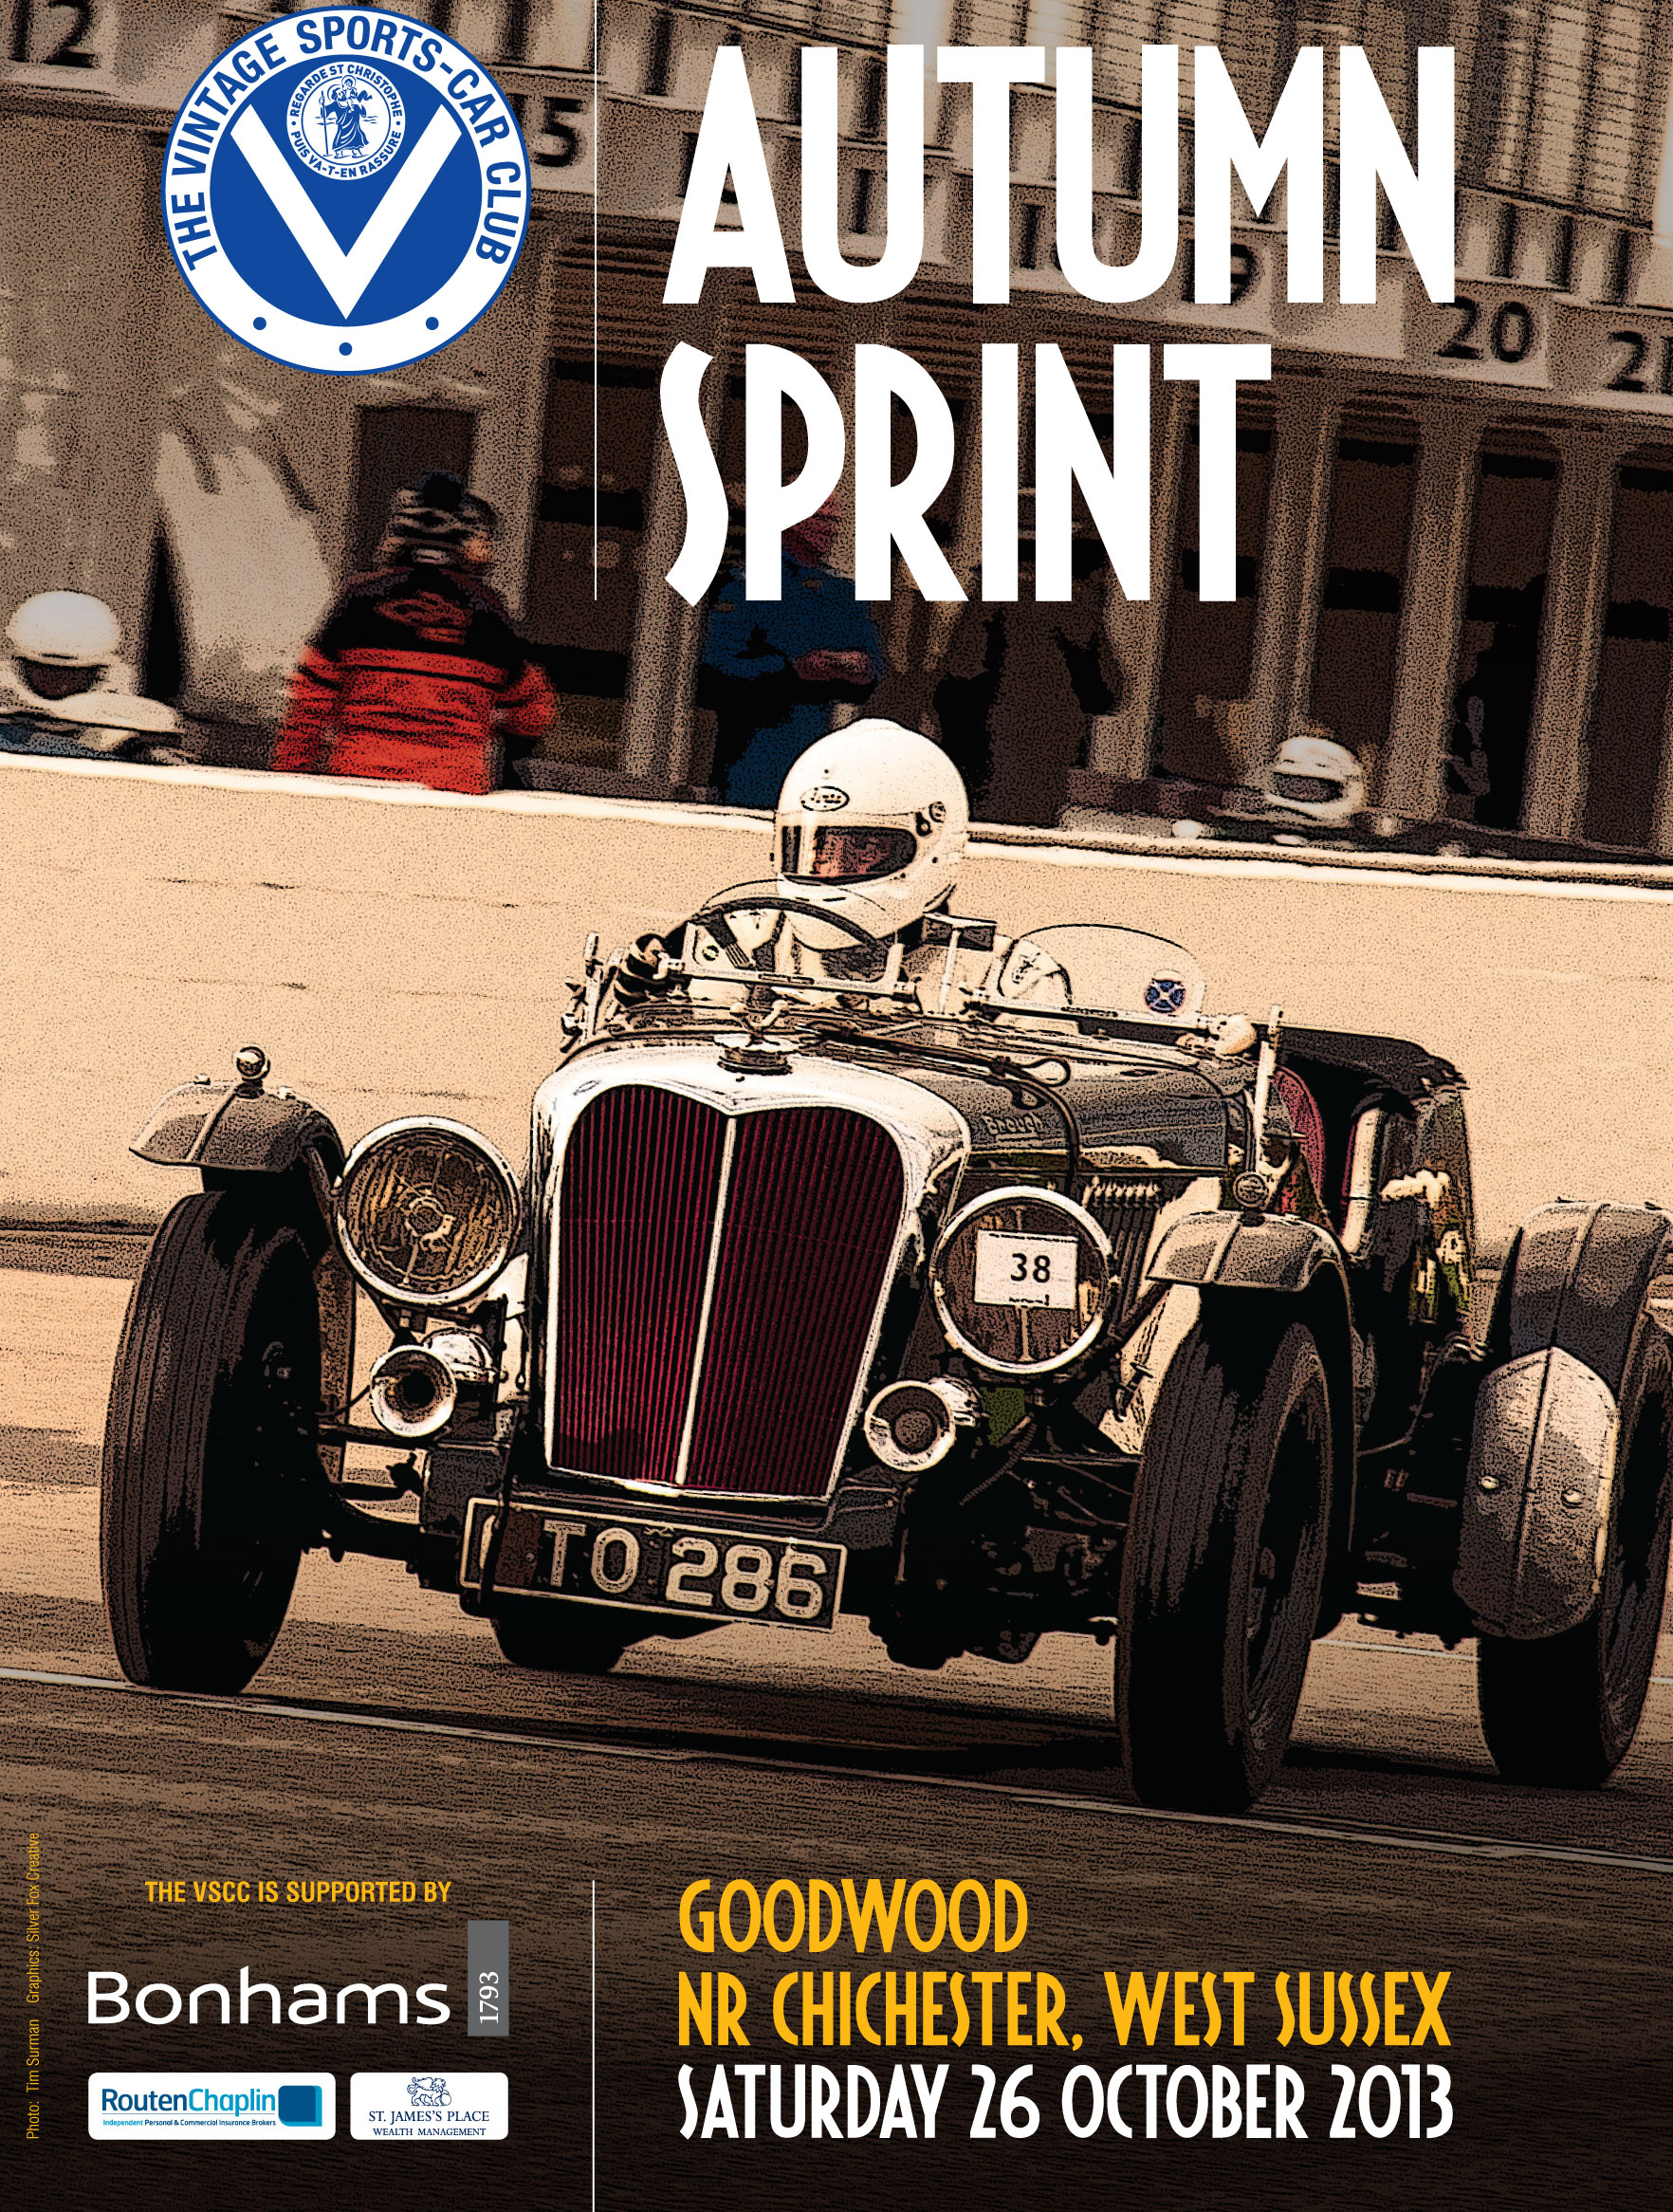 Last Chance to Go Vintage in 2013 at Goodwood this coming Saturday cover